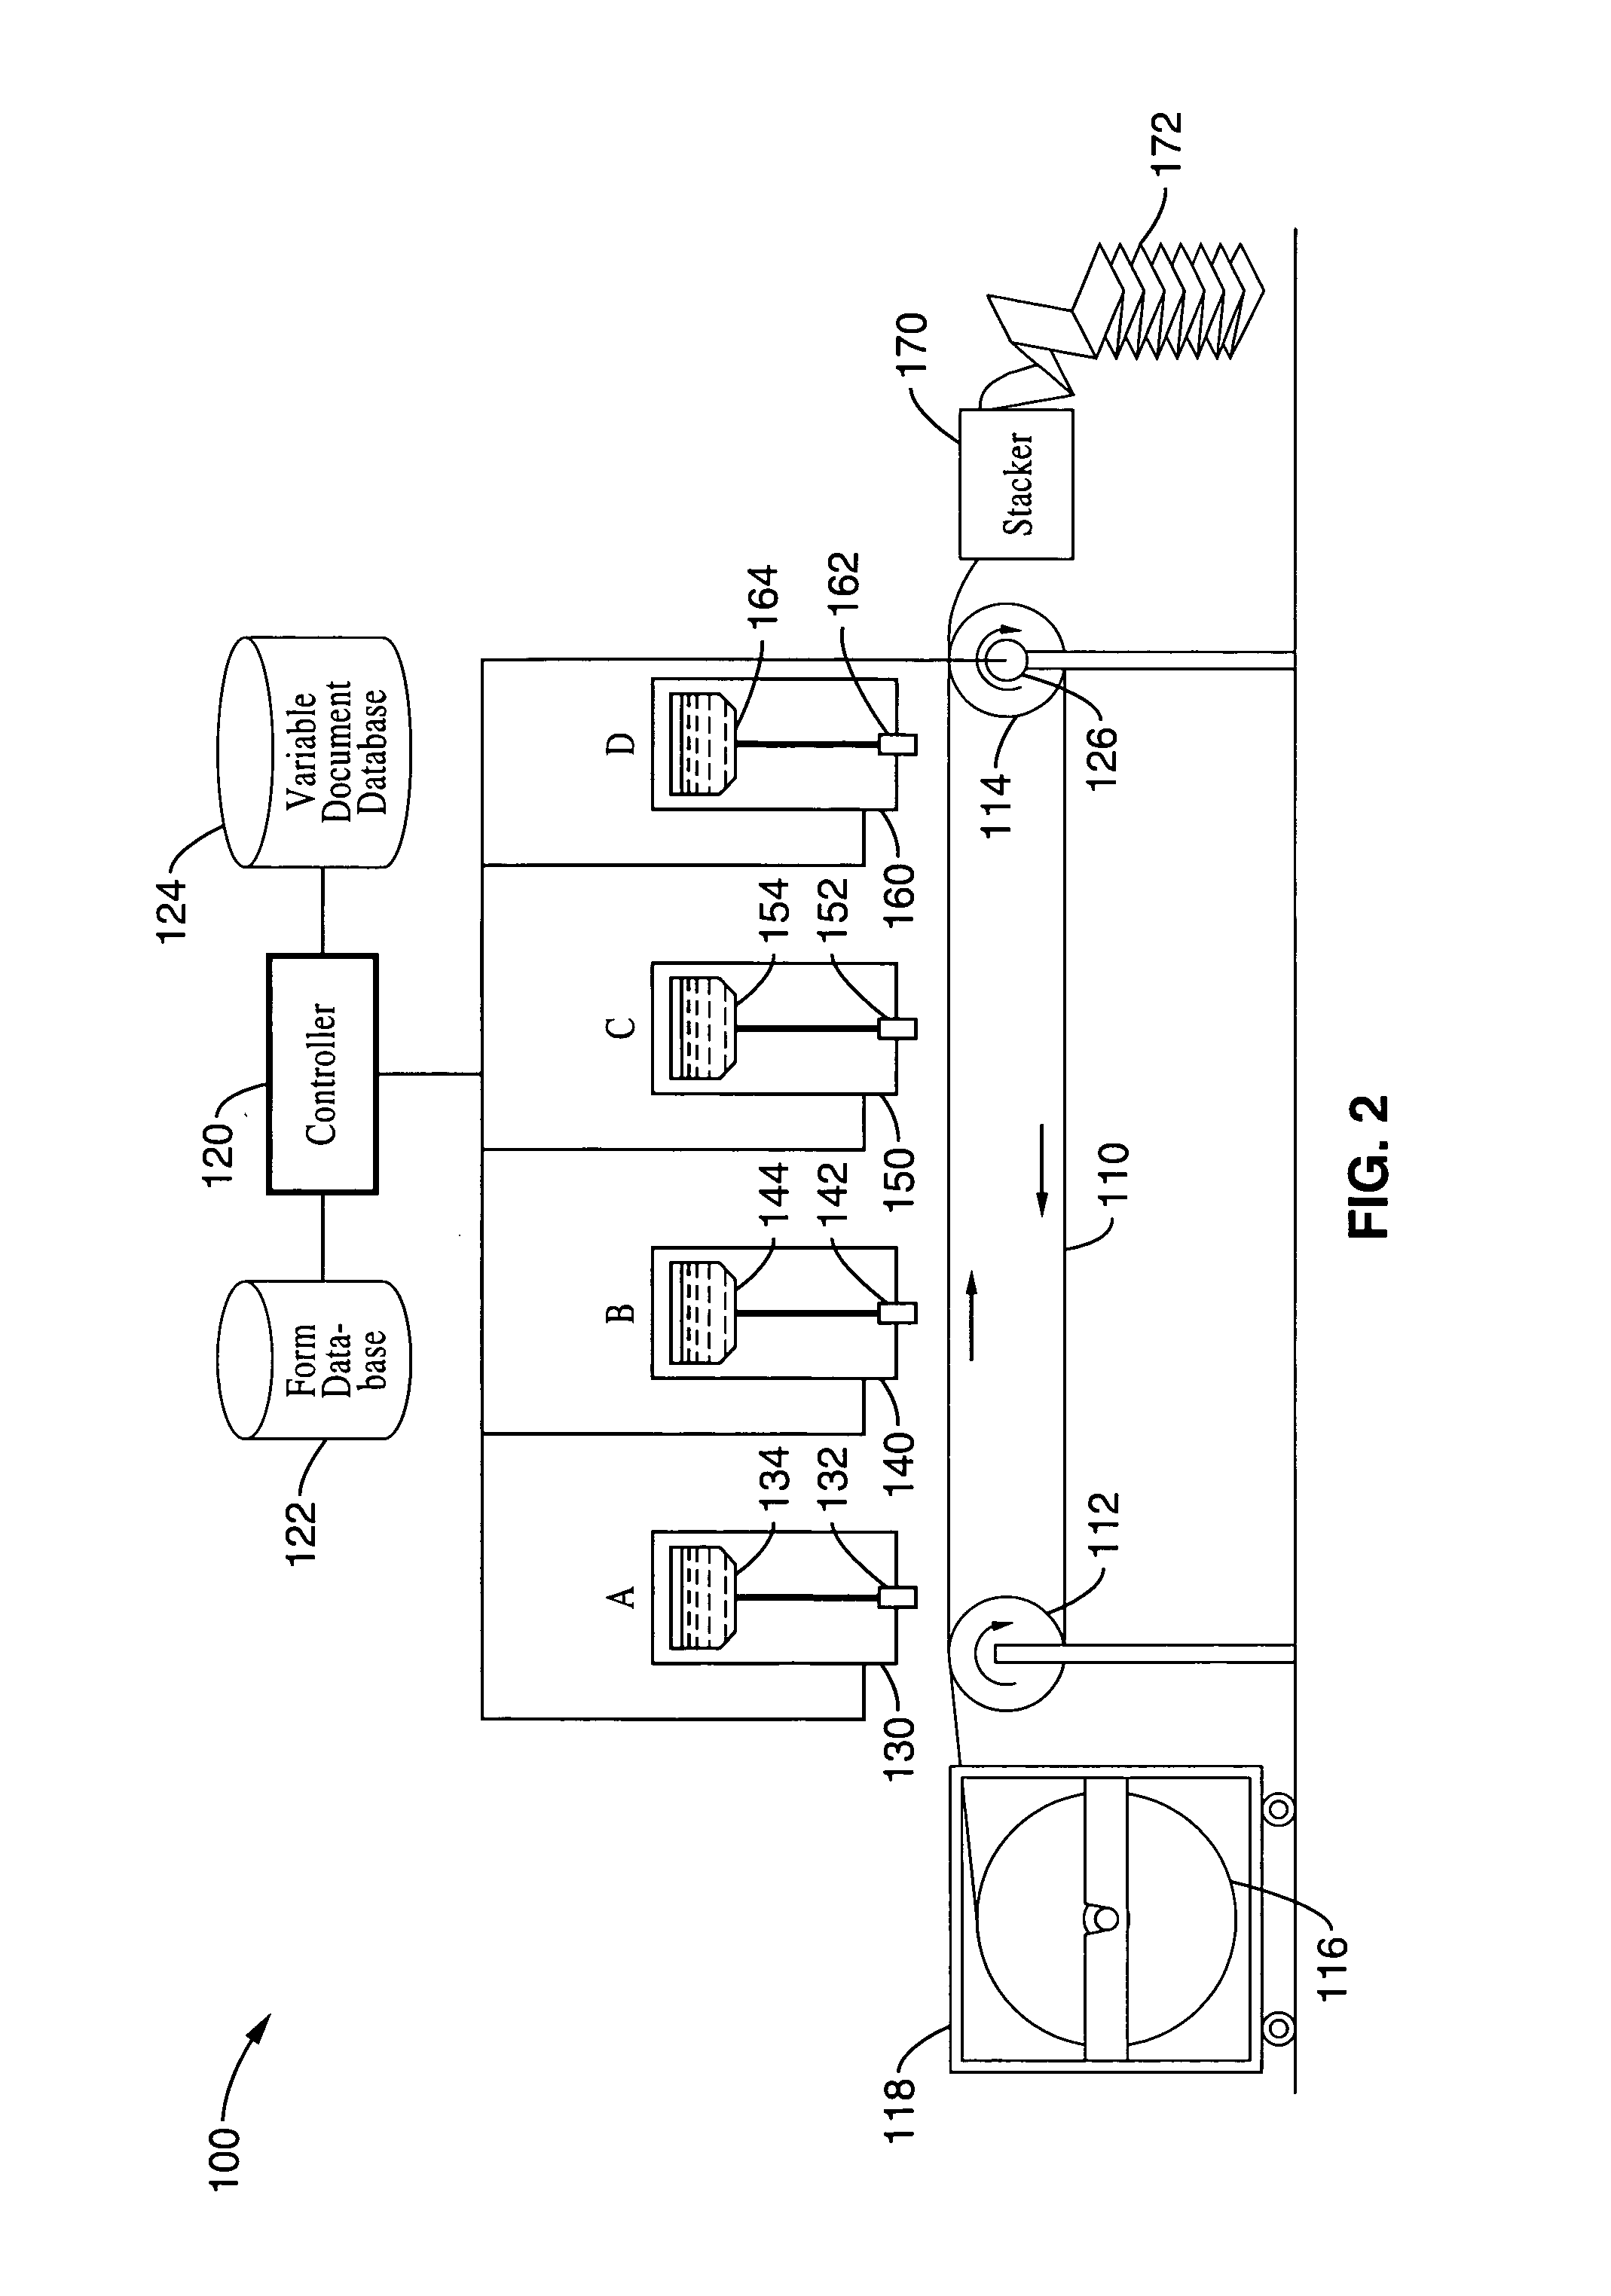 Apparatus and method for high speed printing of form and variable data